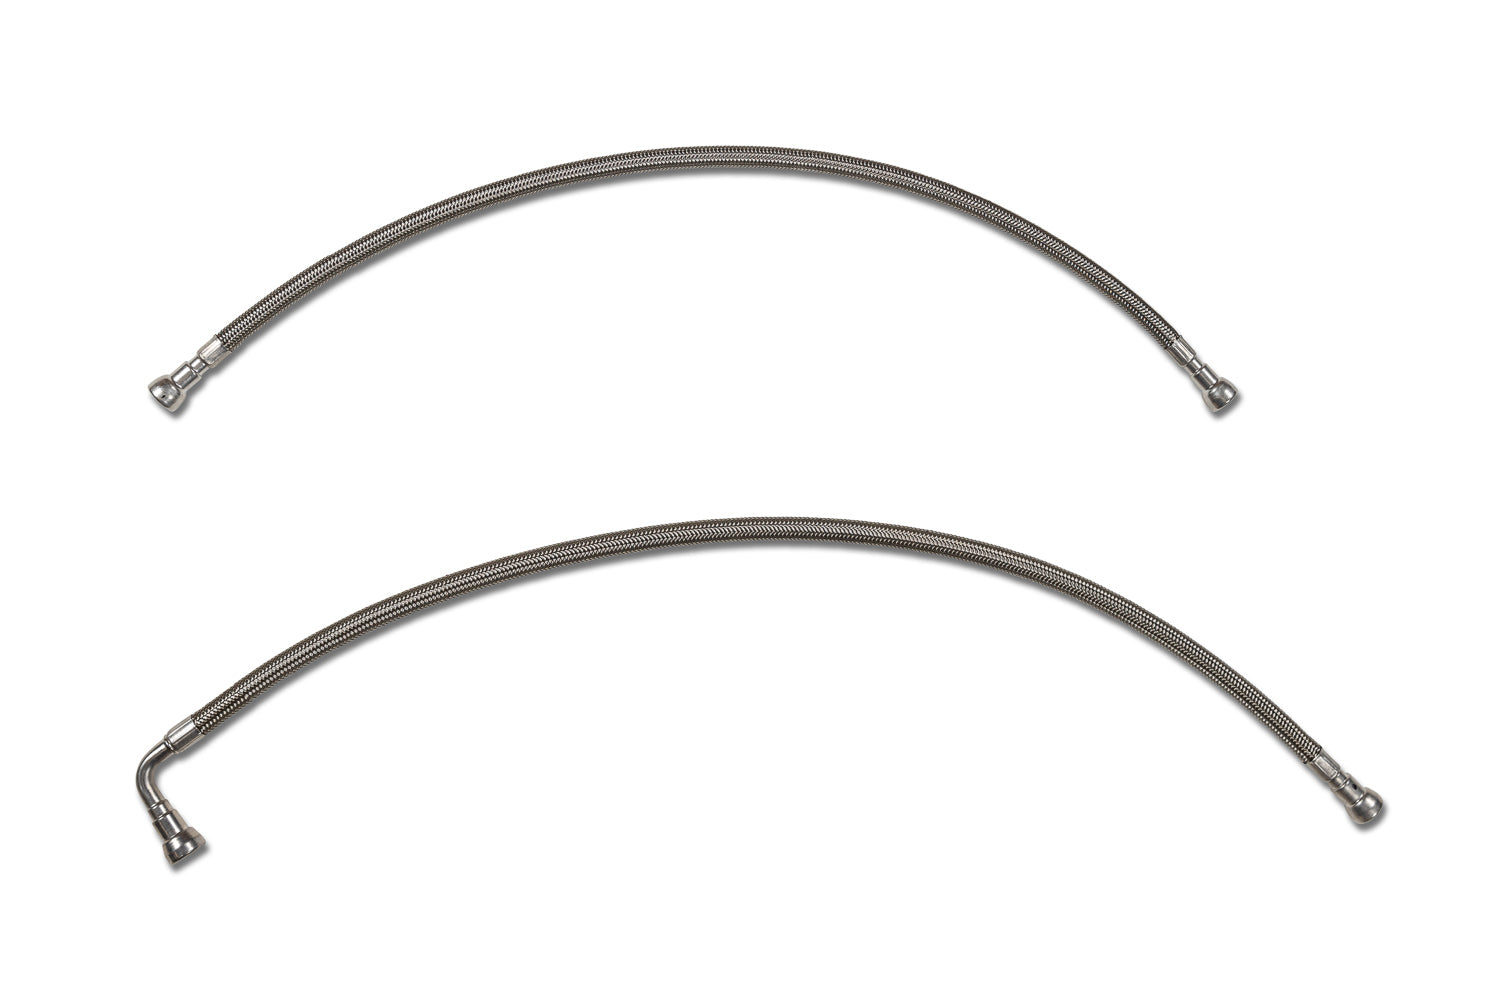 GMC Sonoma Stainless Steel Braided Teflon Hoses 1997 Between Fuel Lines and Fuel Tank Reg Cab 7.5ft Bed 7521-01B1